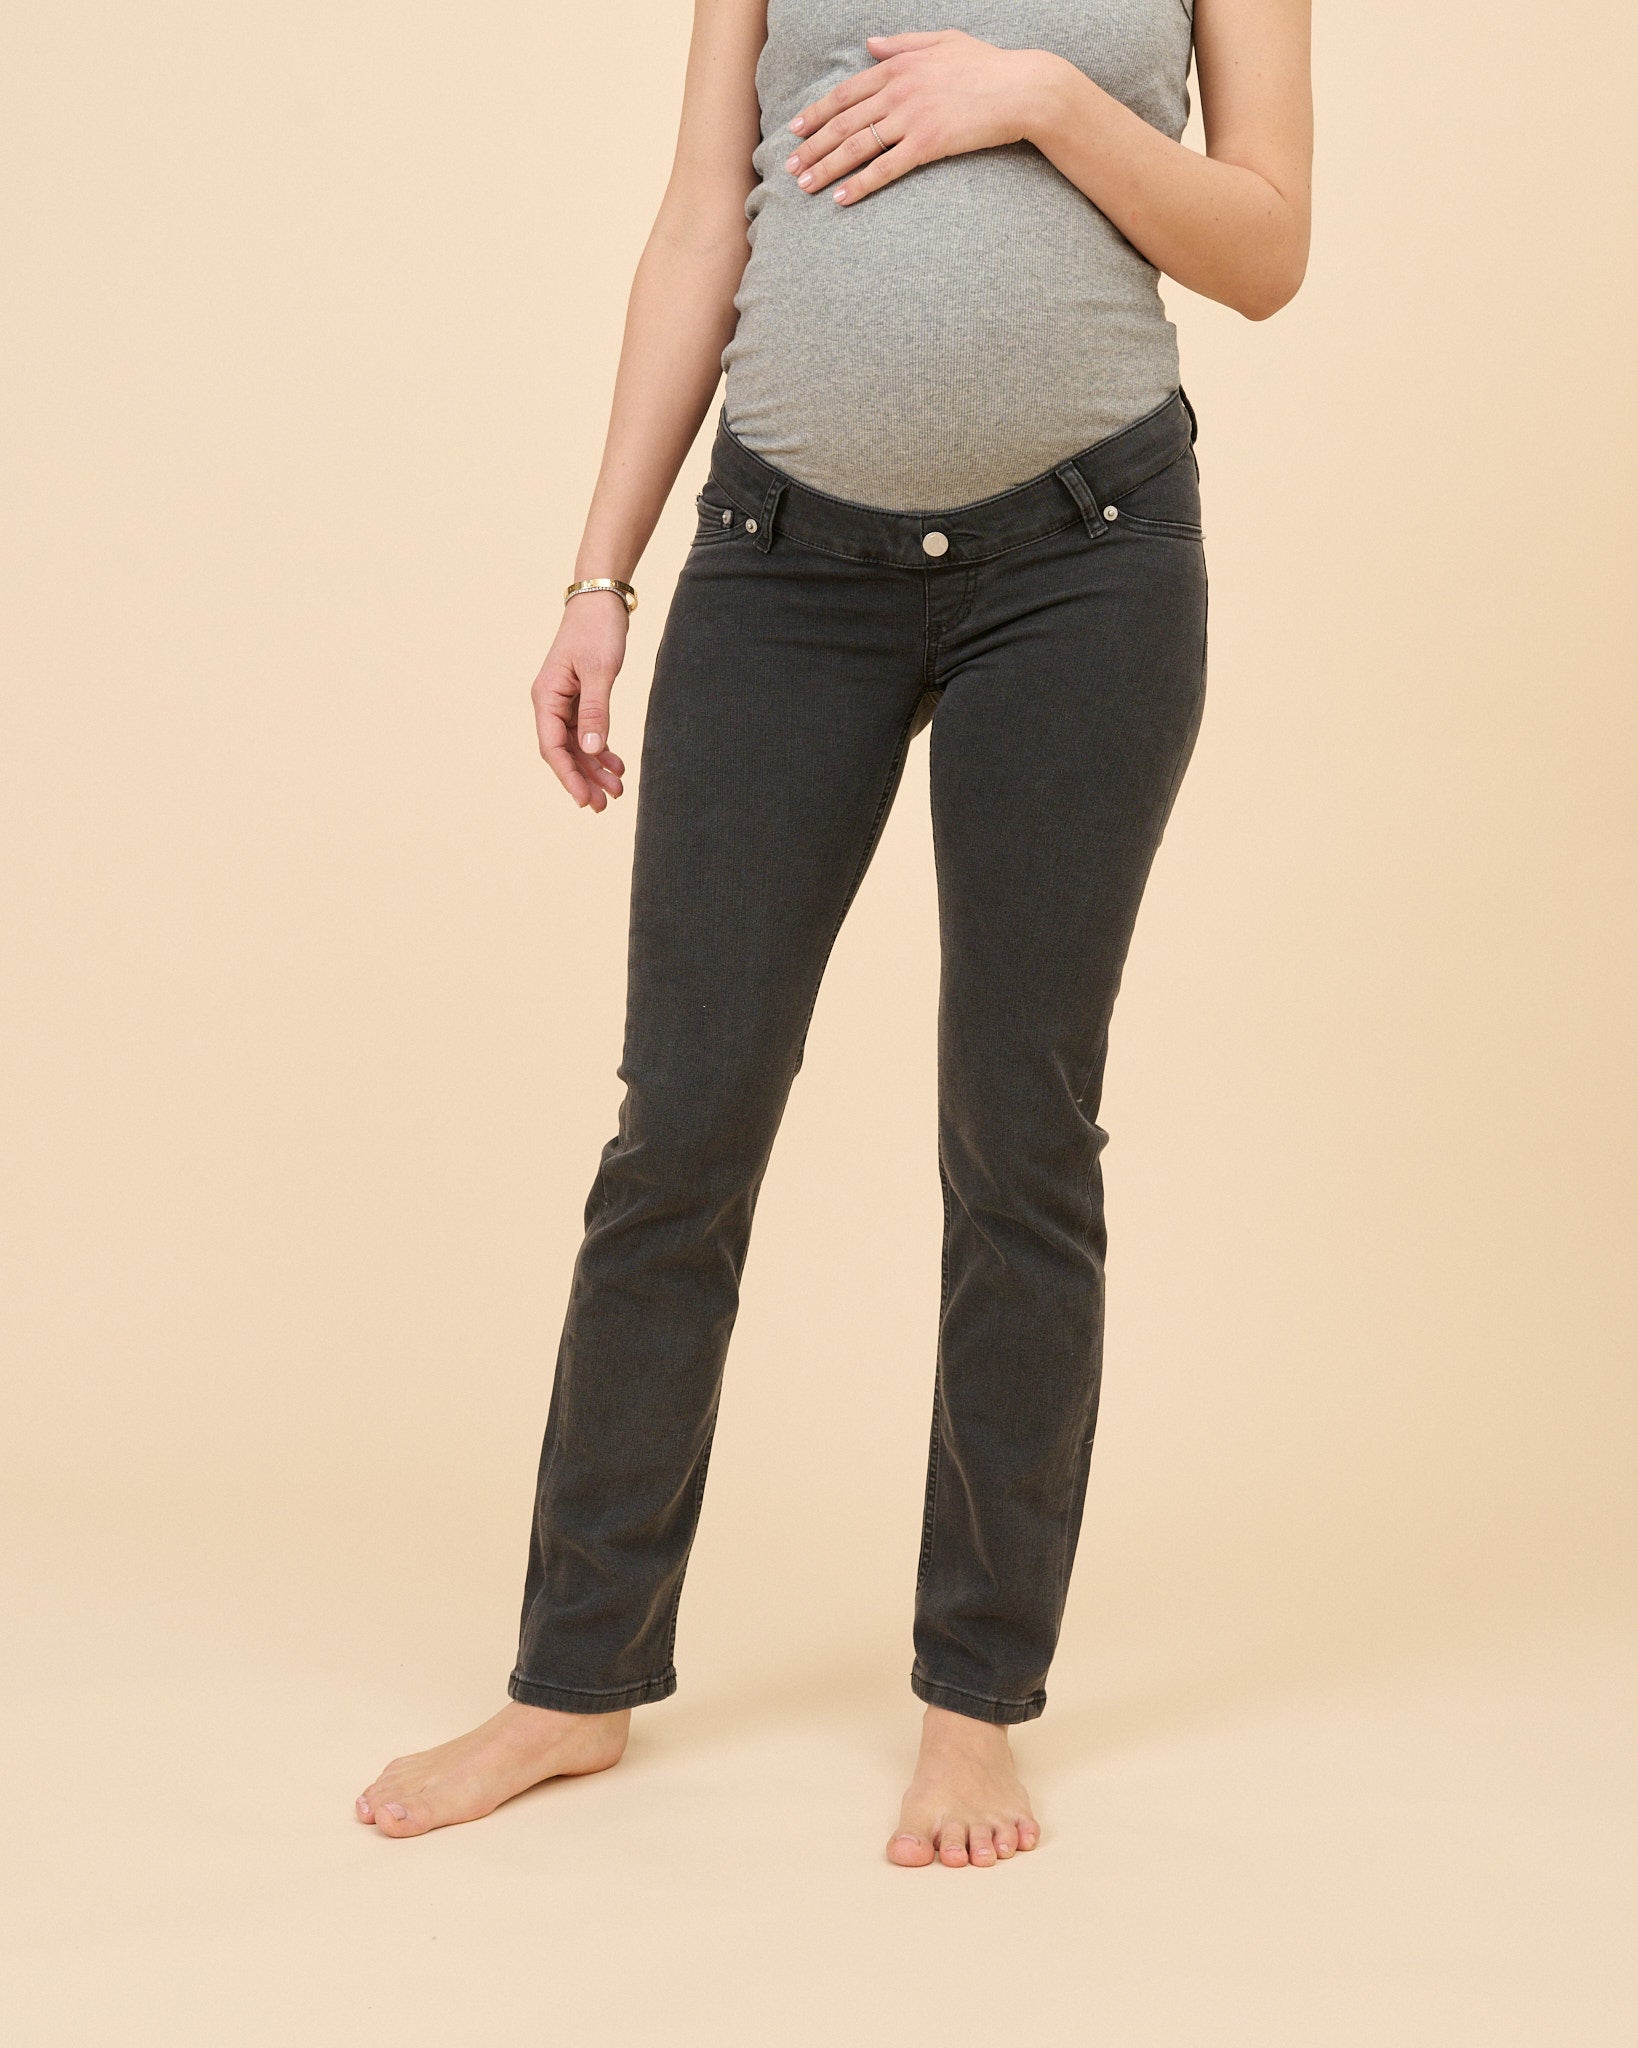 Buy Maternity Jeans Overalls With Belly Support for Pregnant Women,  johnny's Mama Online in India - Etsy